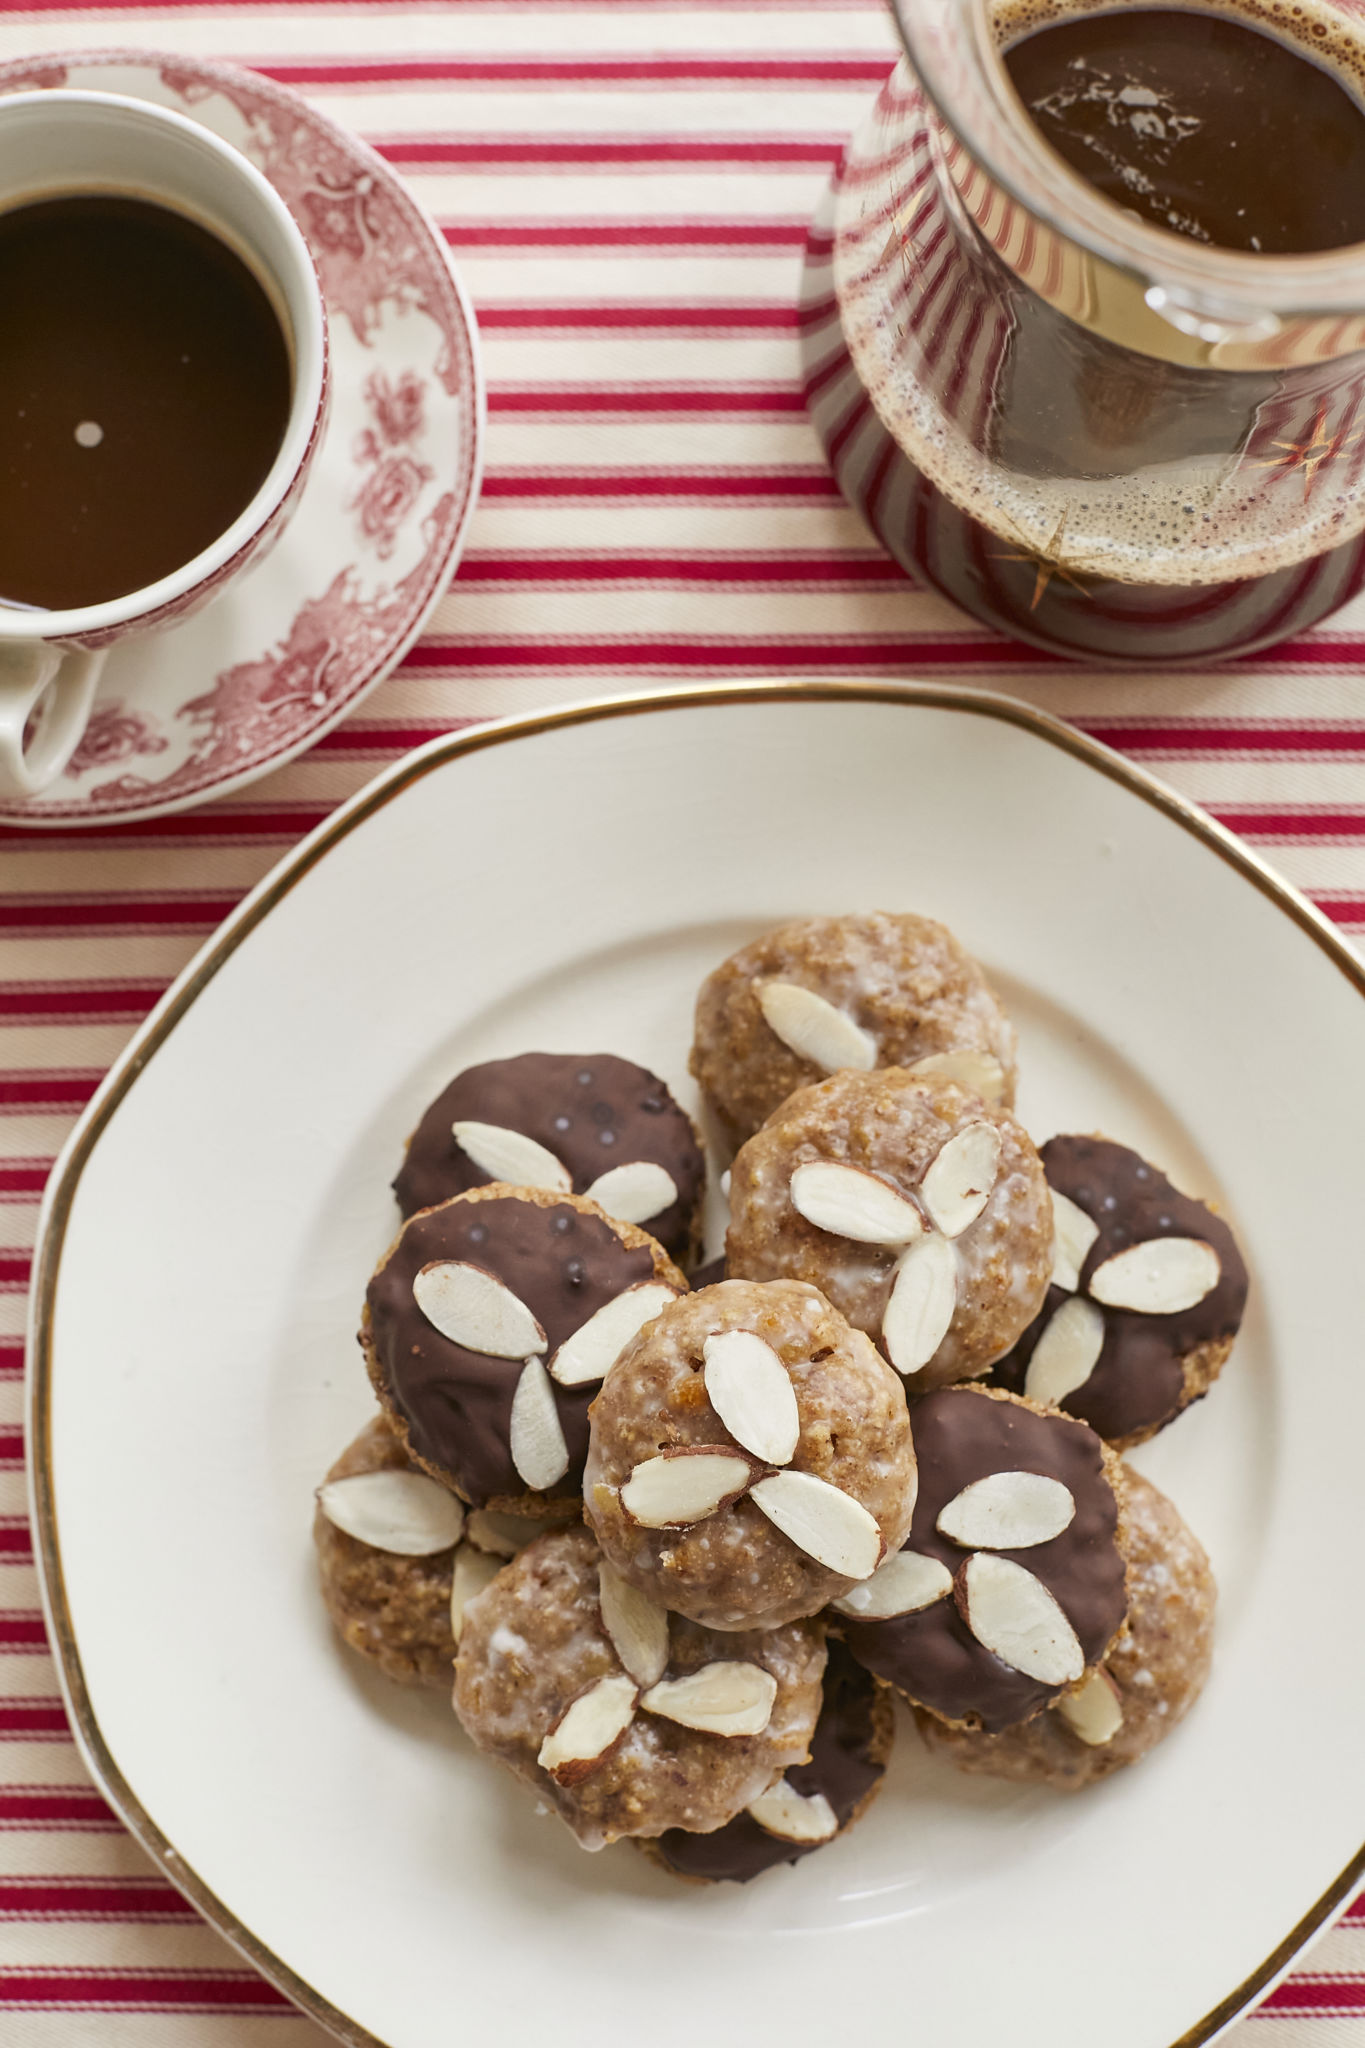 On a red and white table cloth, a white plate with half chocolate, half glazed Lebkuchen, covered in almonds, are served on a white plate next to two tea cups filled with thick hot chocolate.